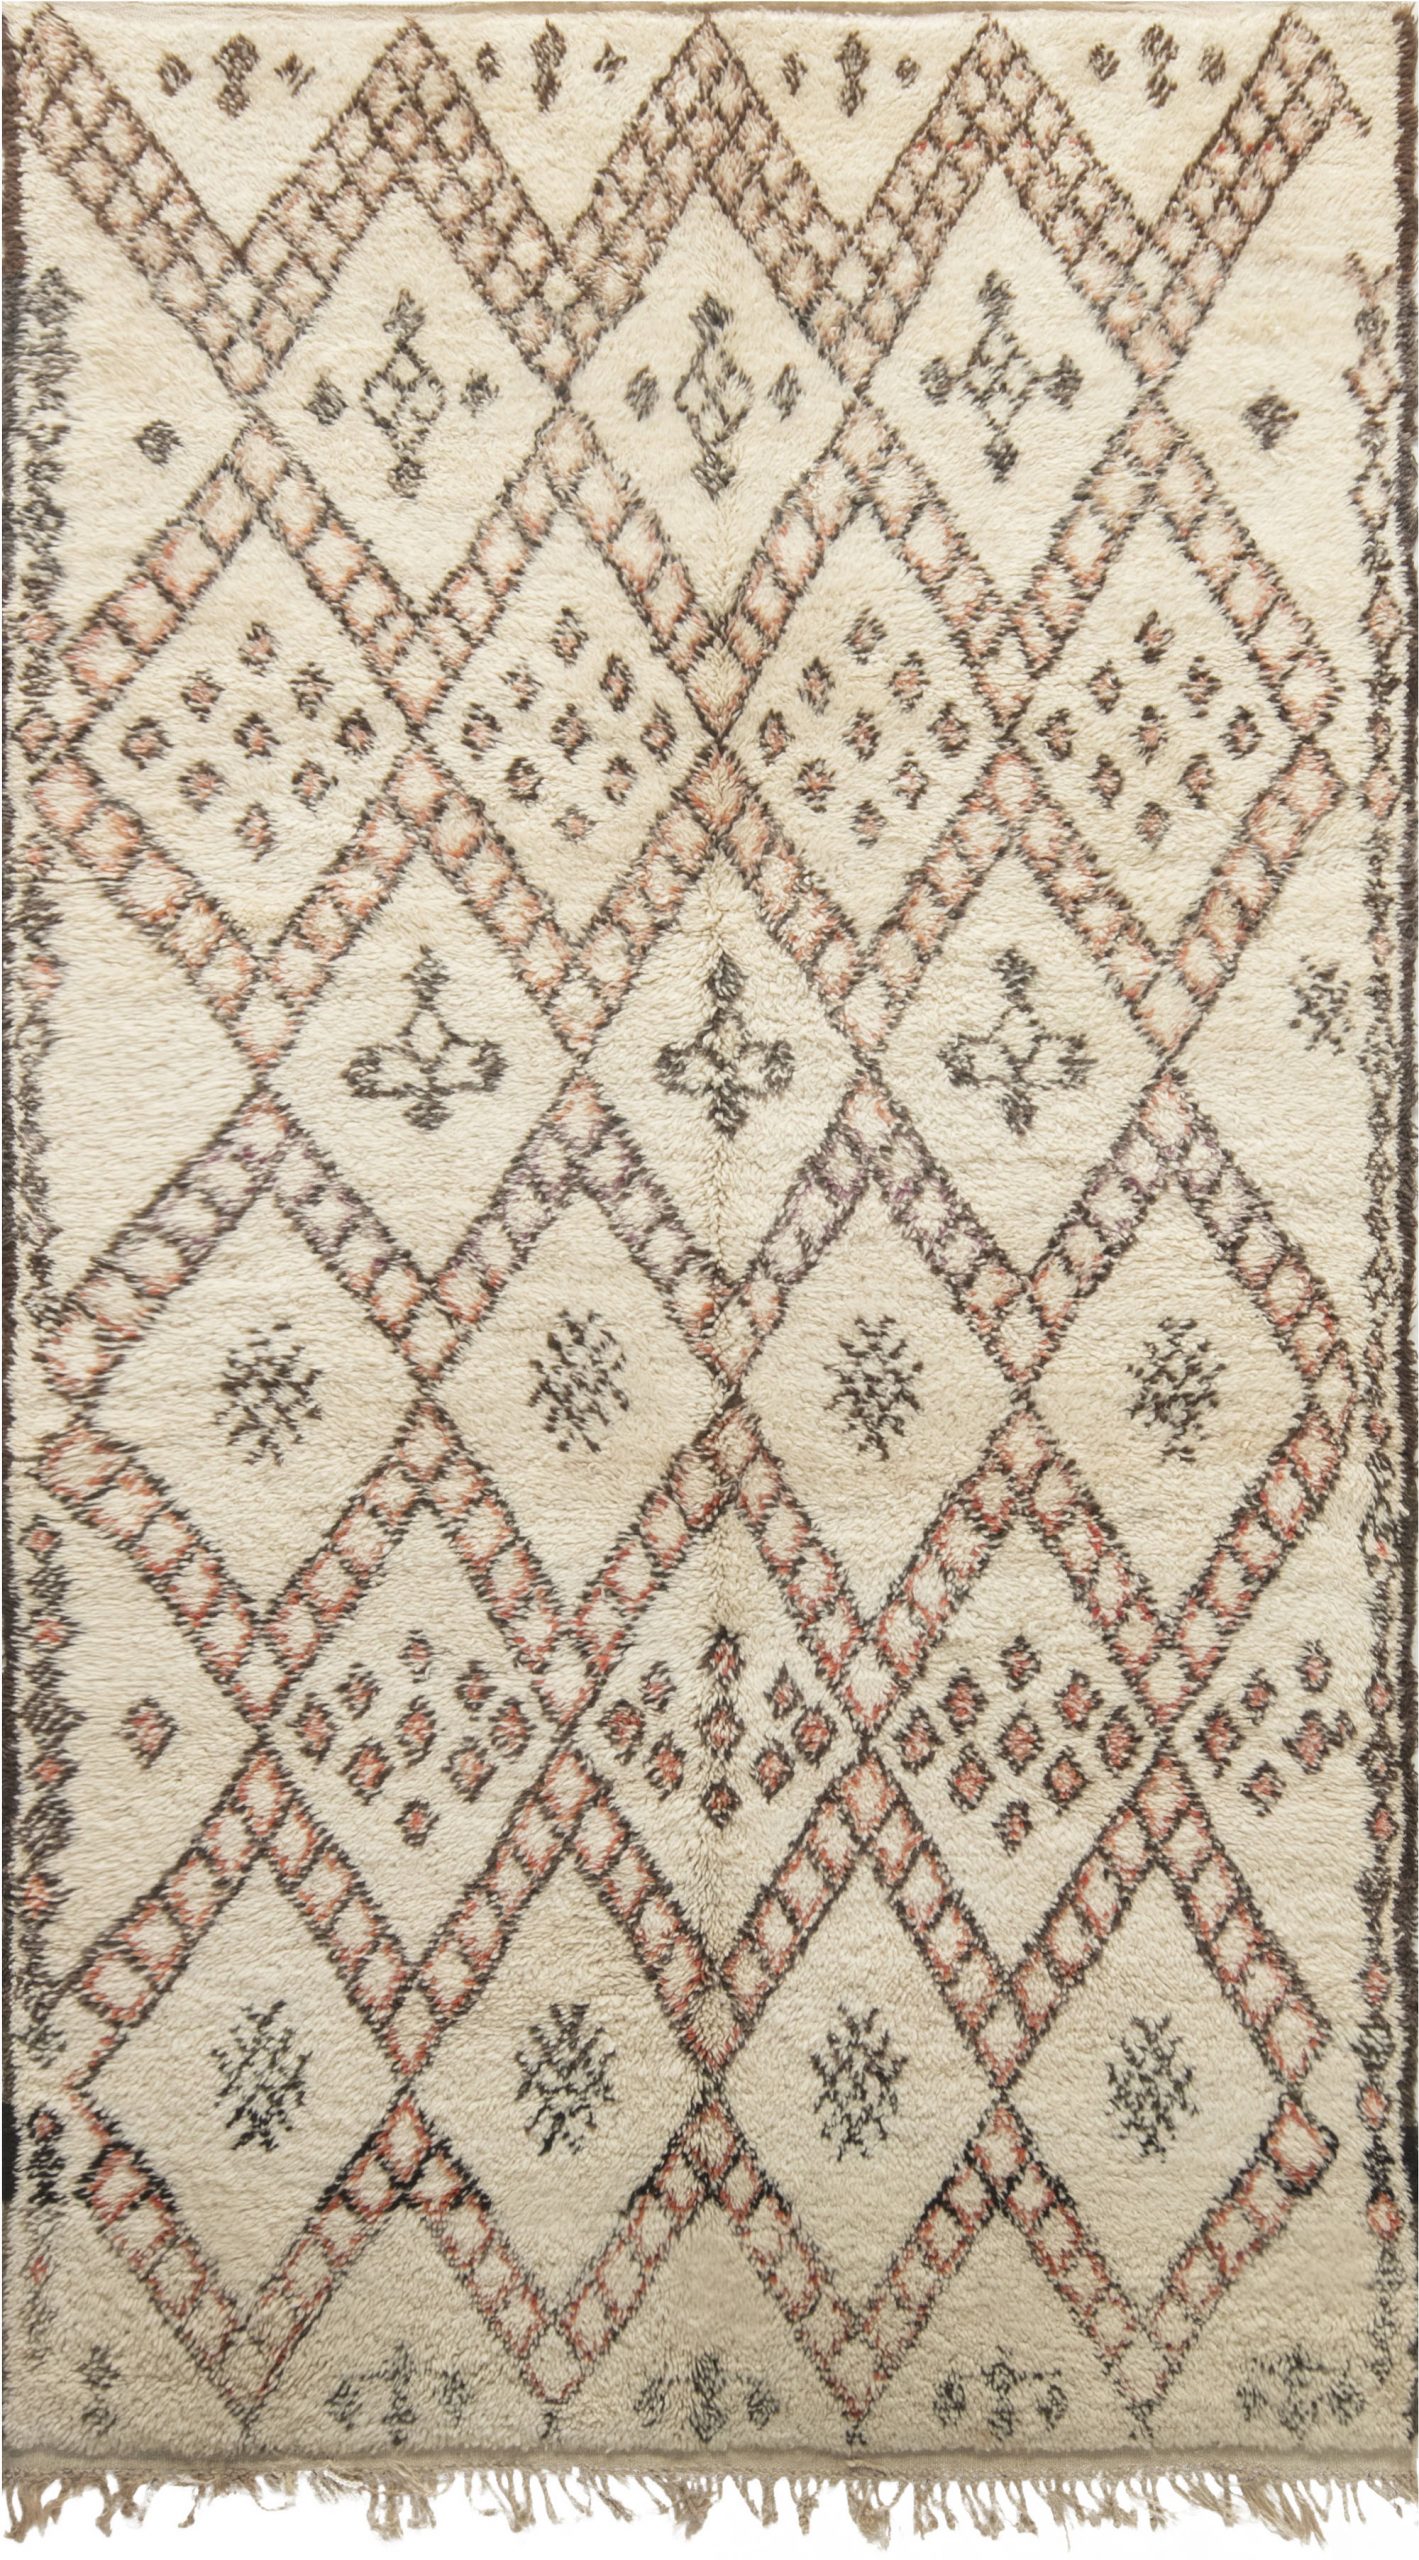 Vintage Tribal Hand-<mark class='searchwp-highlight'>knotted</mark> Moroccan Area Rug in White, Peach, and Brown BB6878